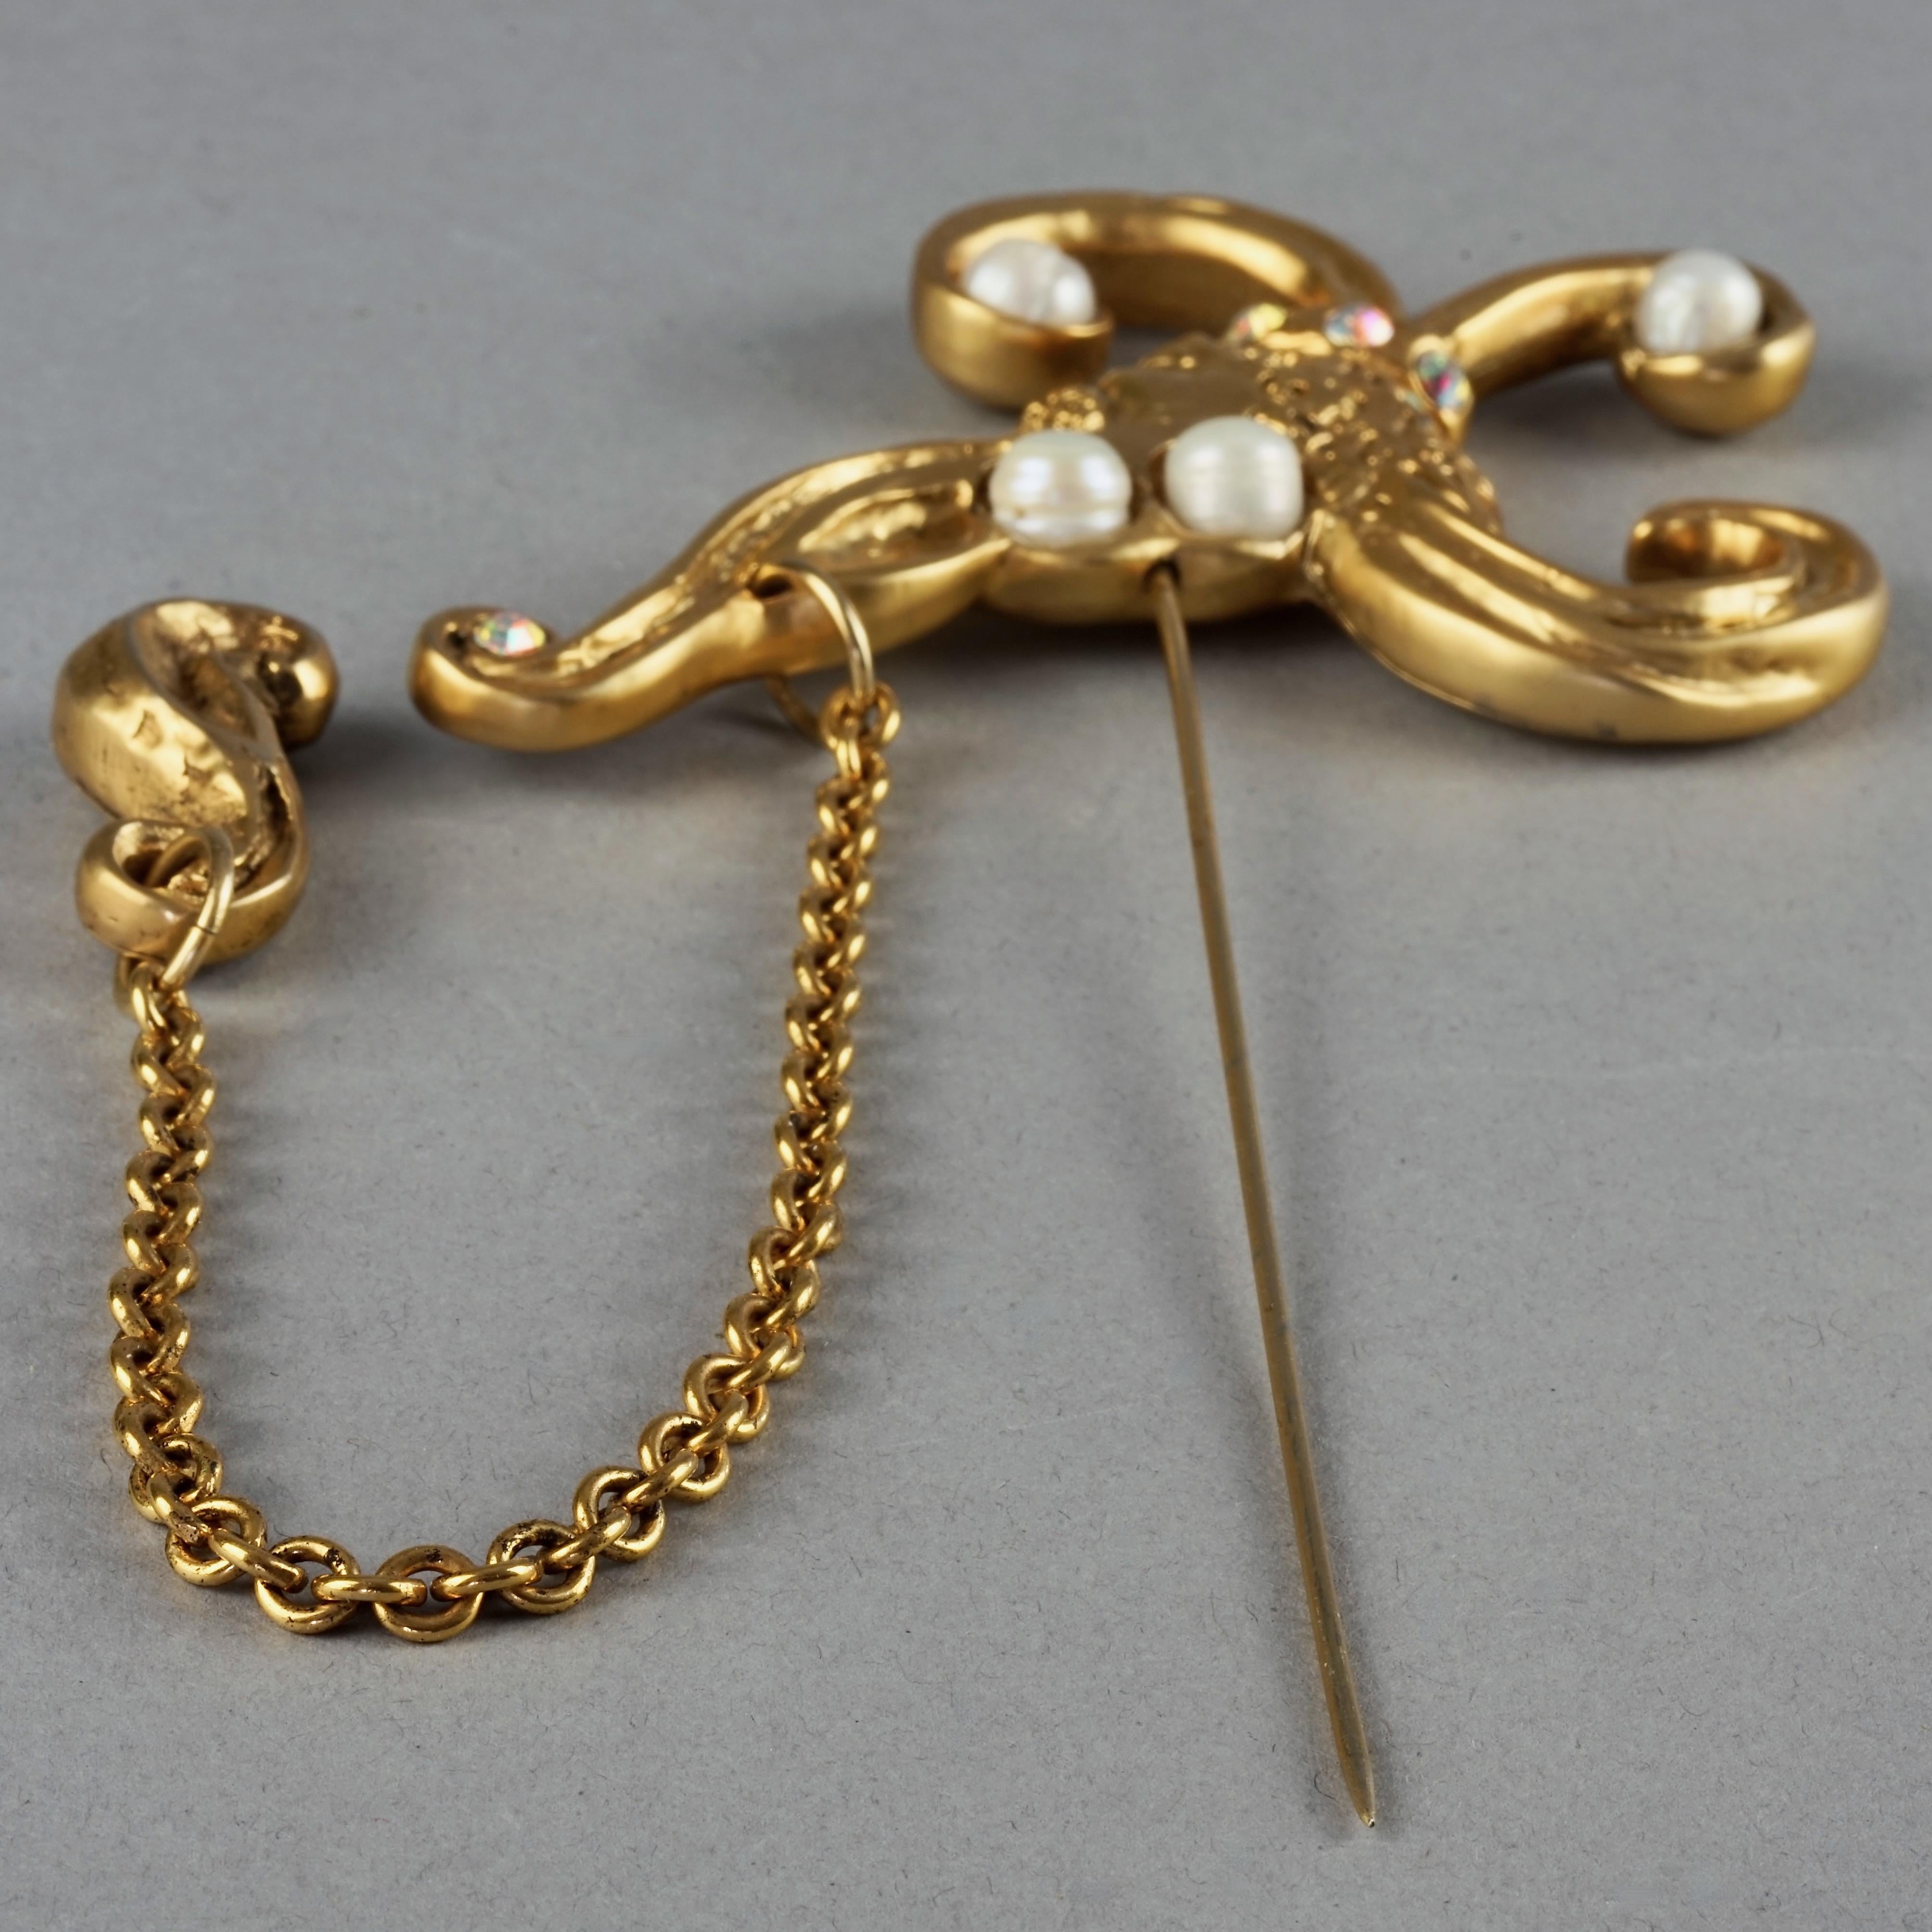 Vintage CLAIRE DEVE Arabesque Stylized Pearl Hatpin Brooch For Sale 1